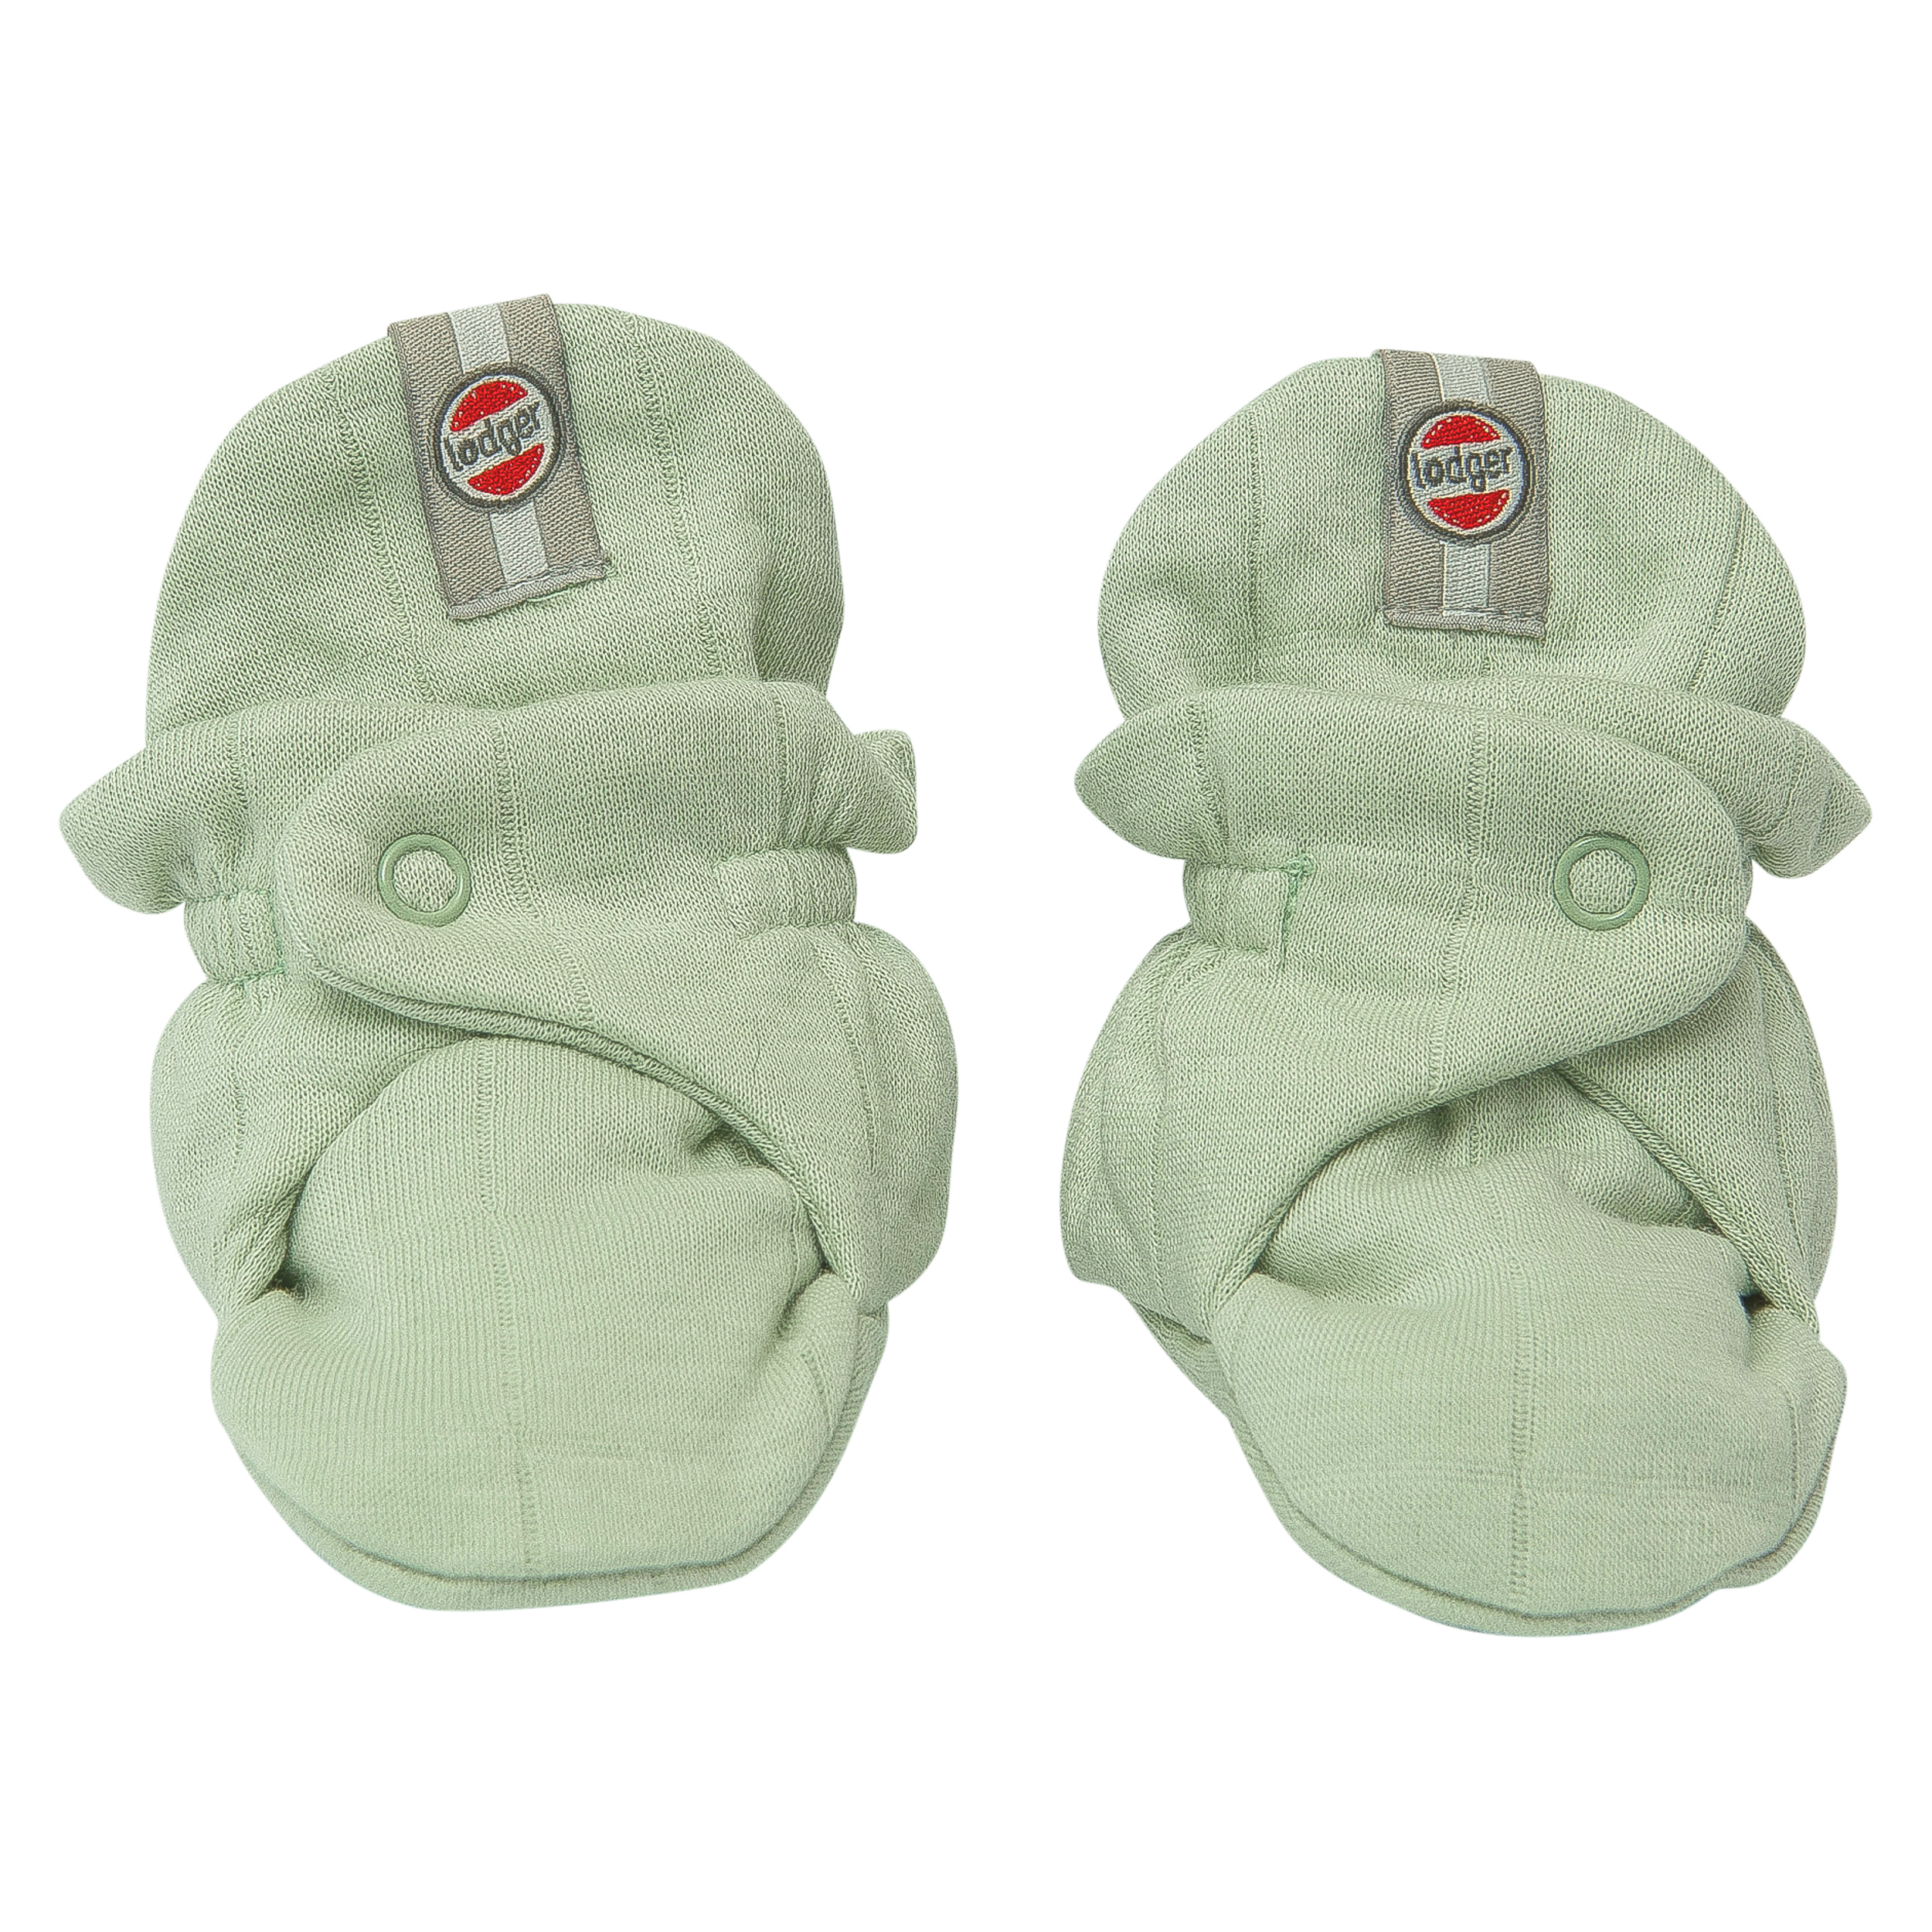 baby slippers